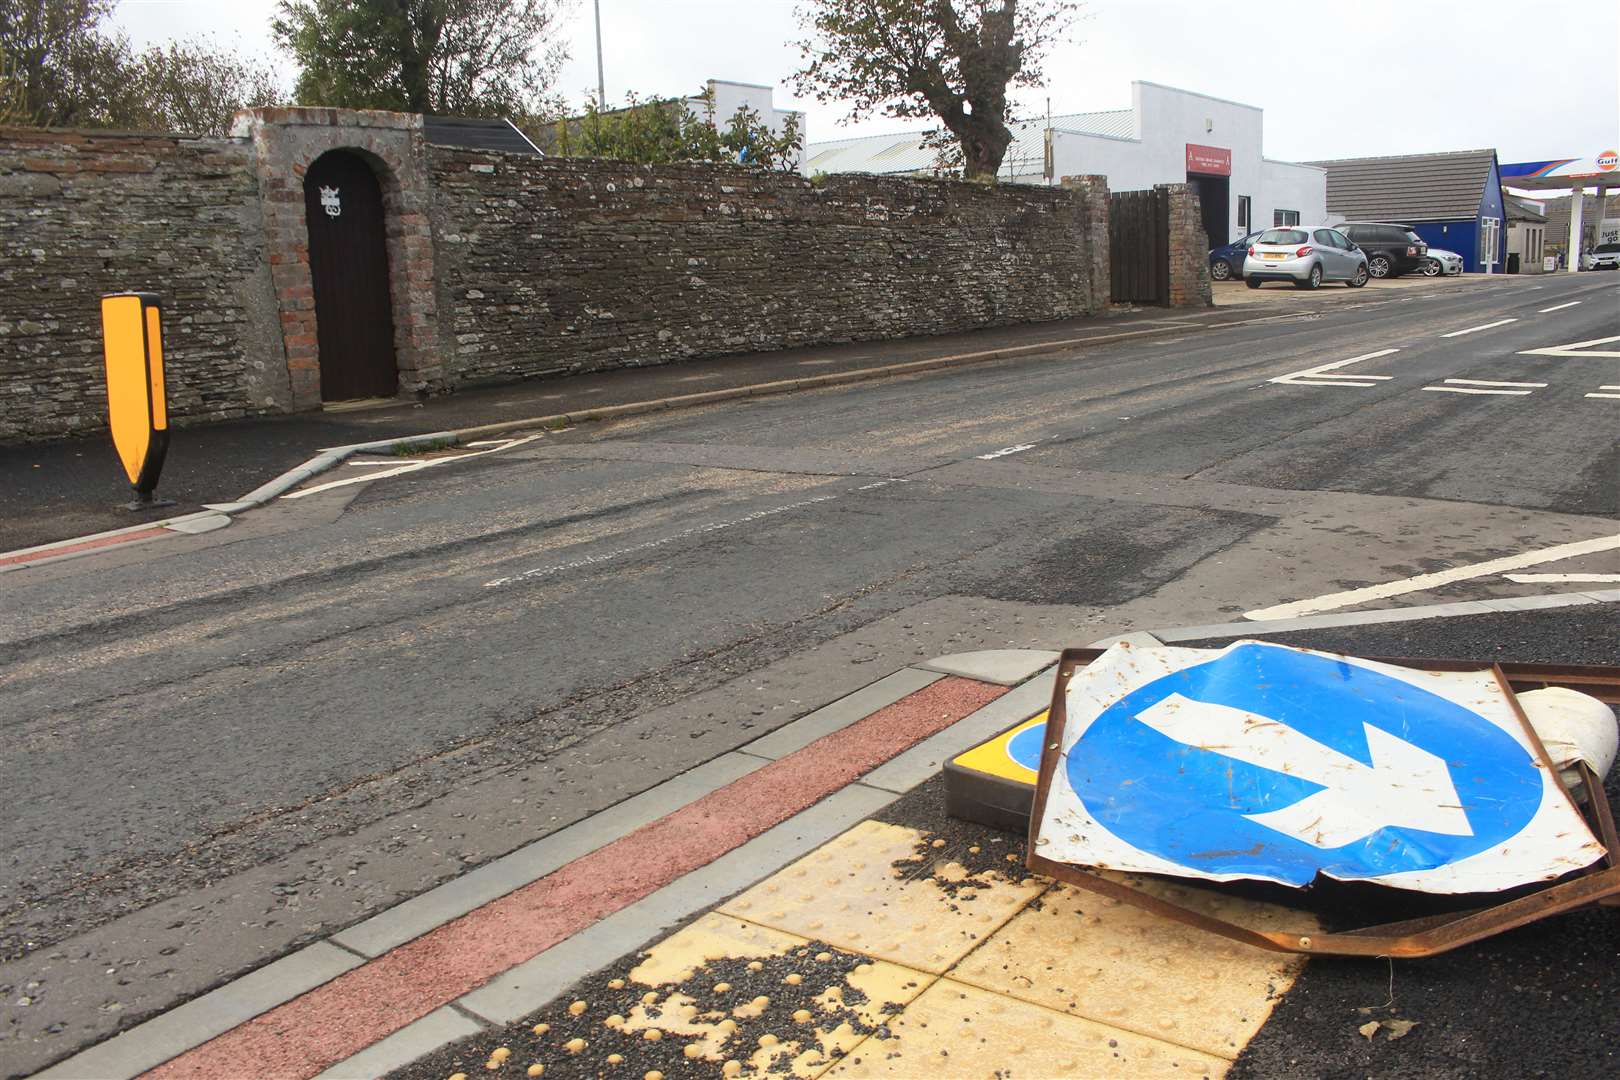 A buckled road sign on top of the flattened bollard.